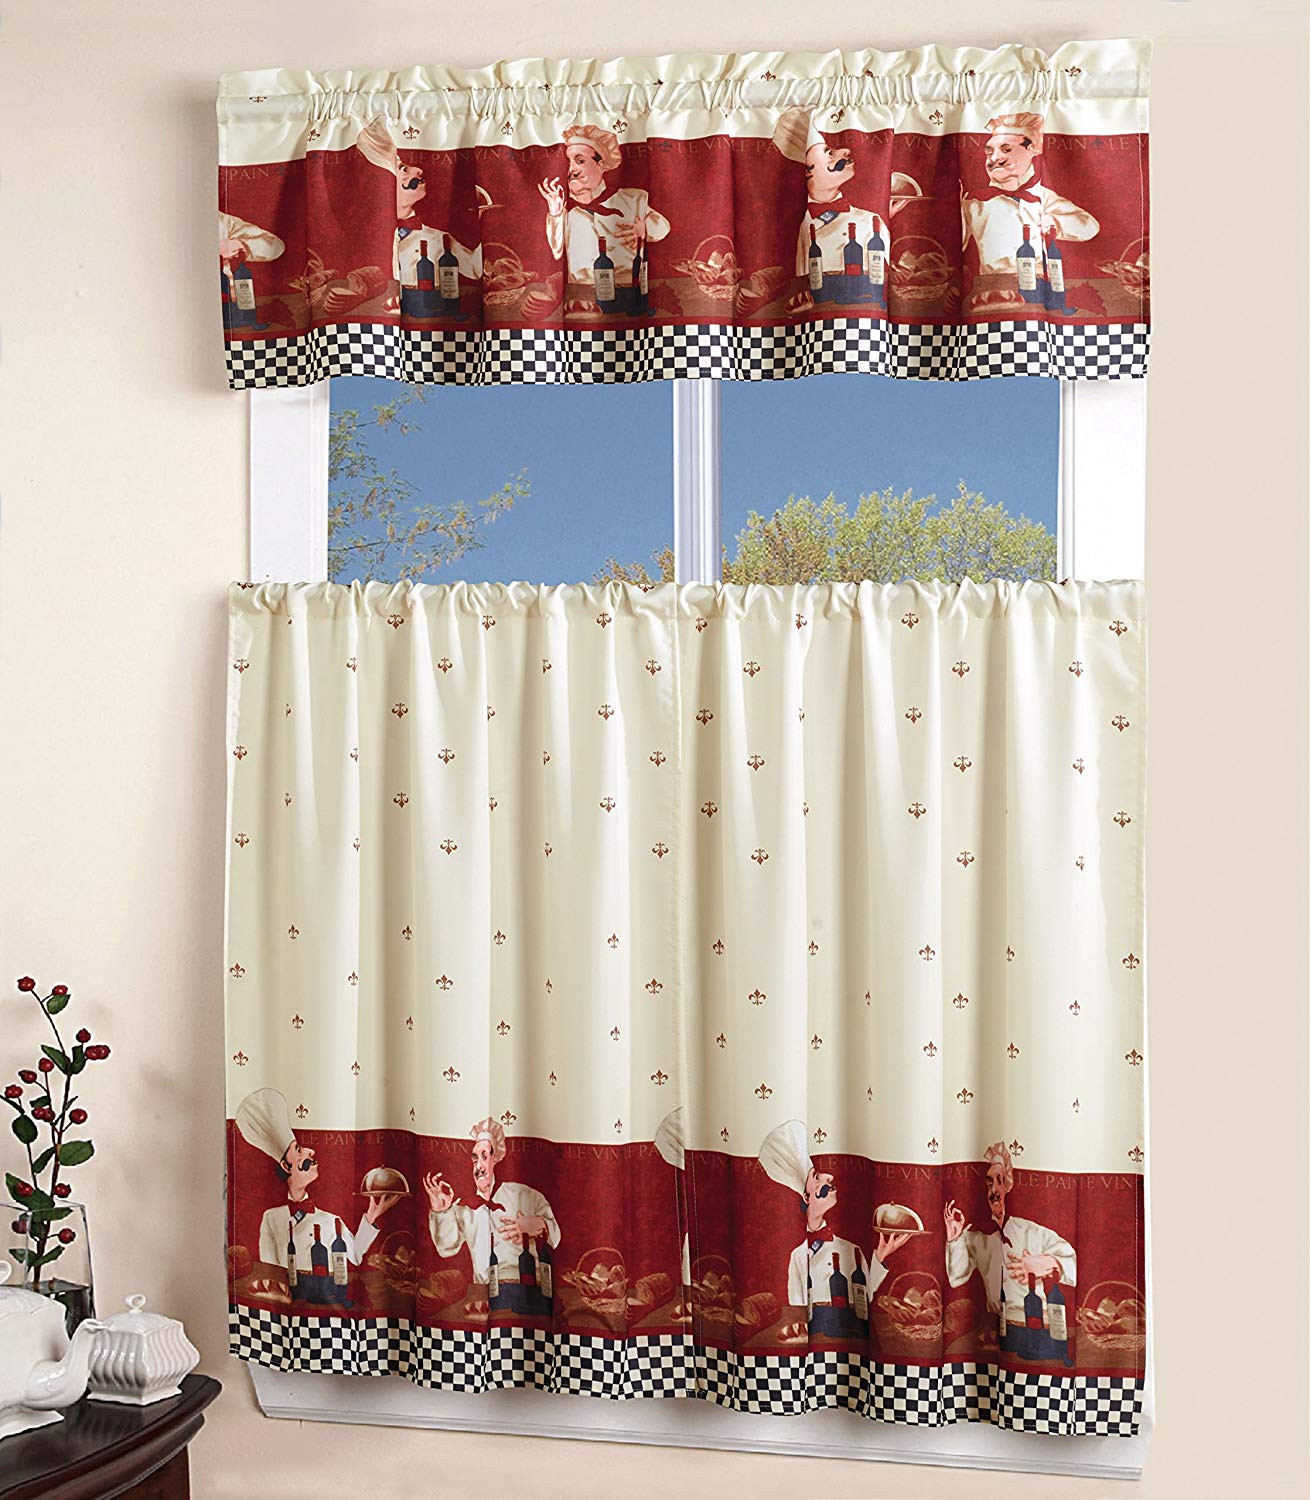 Walmart Curtains Kitchen
 MarCielo 3 Piece Printed Floral Kitchen Cafe Curtain With